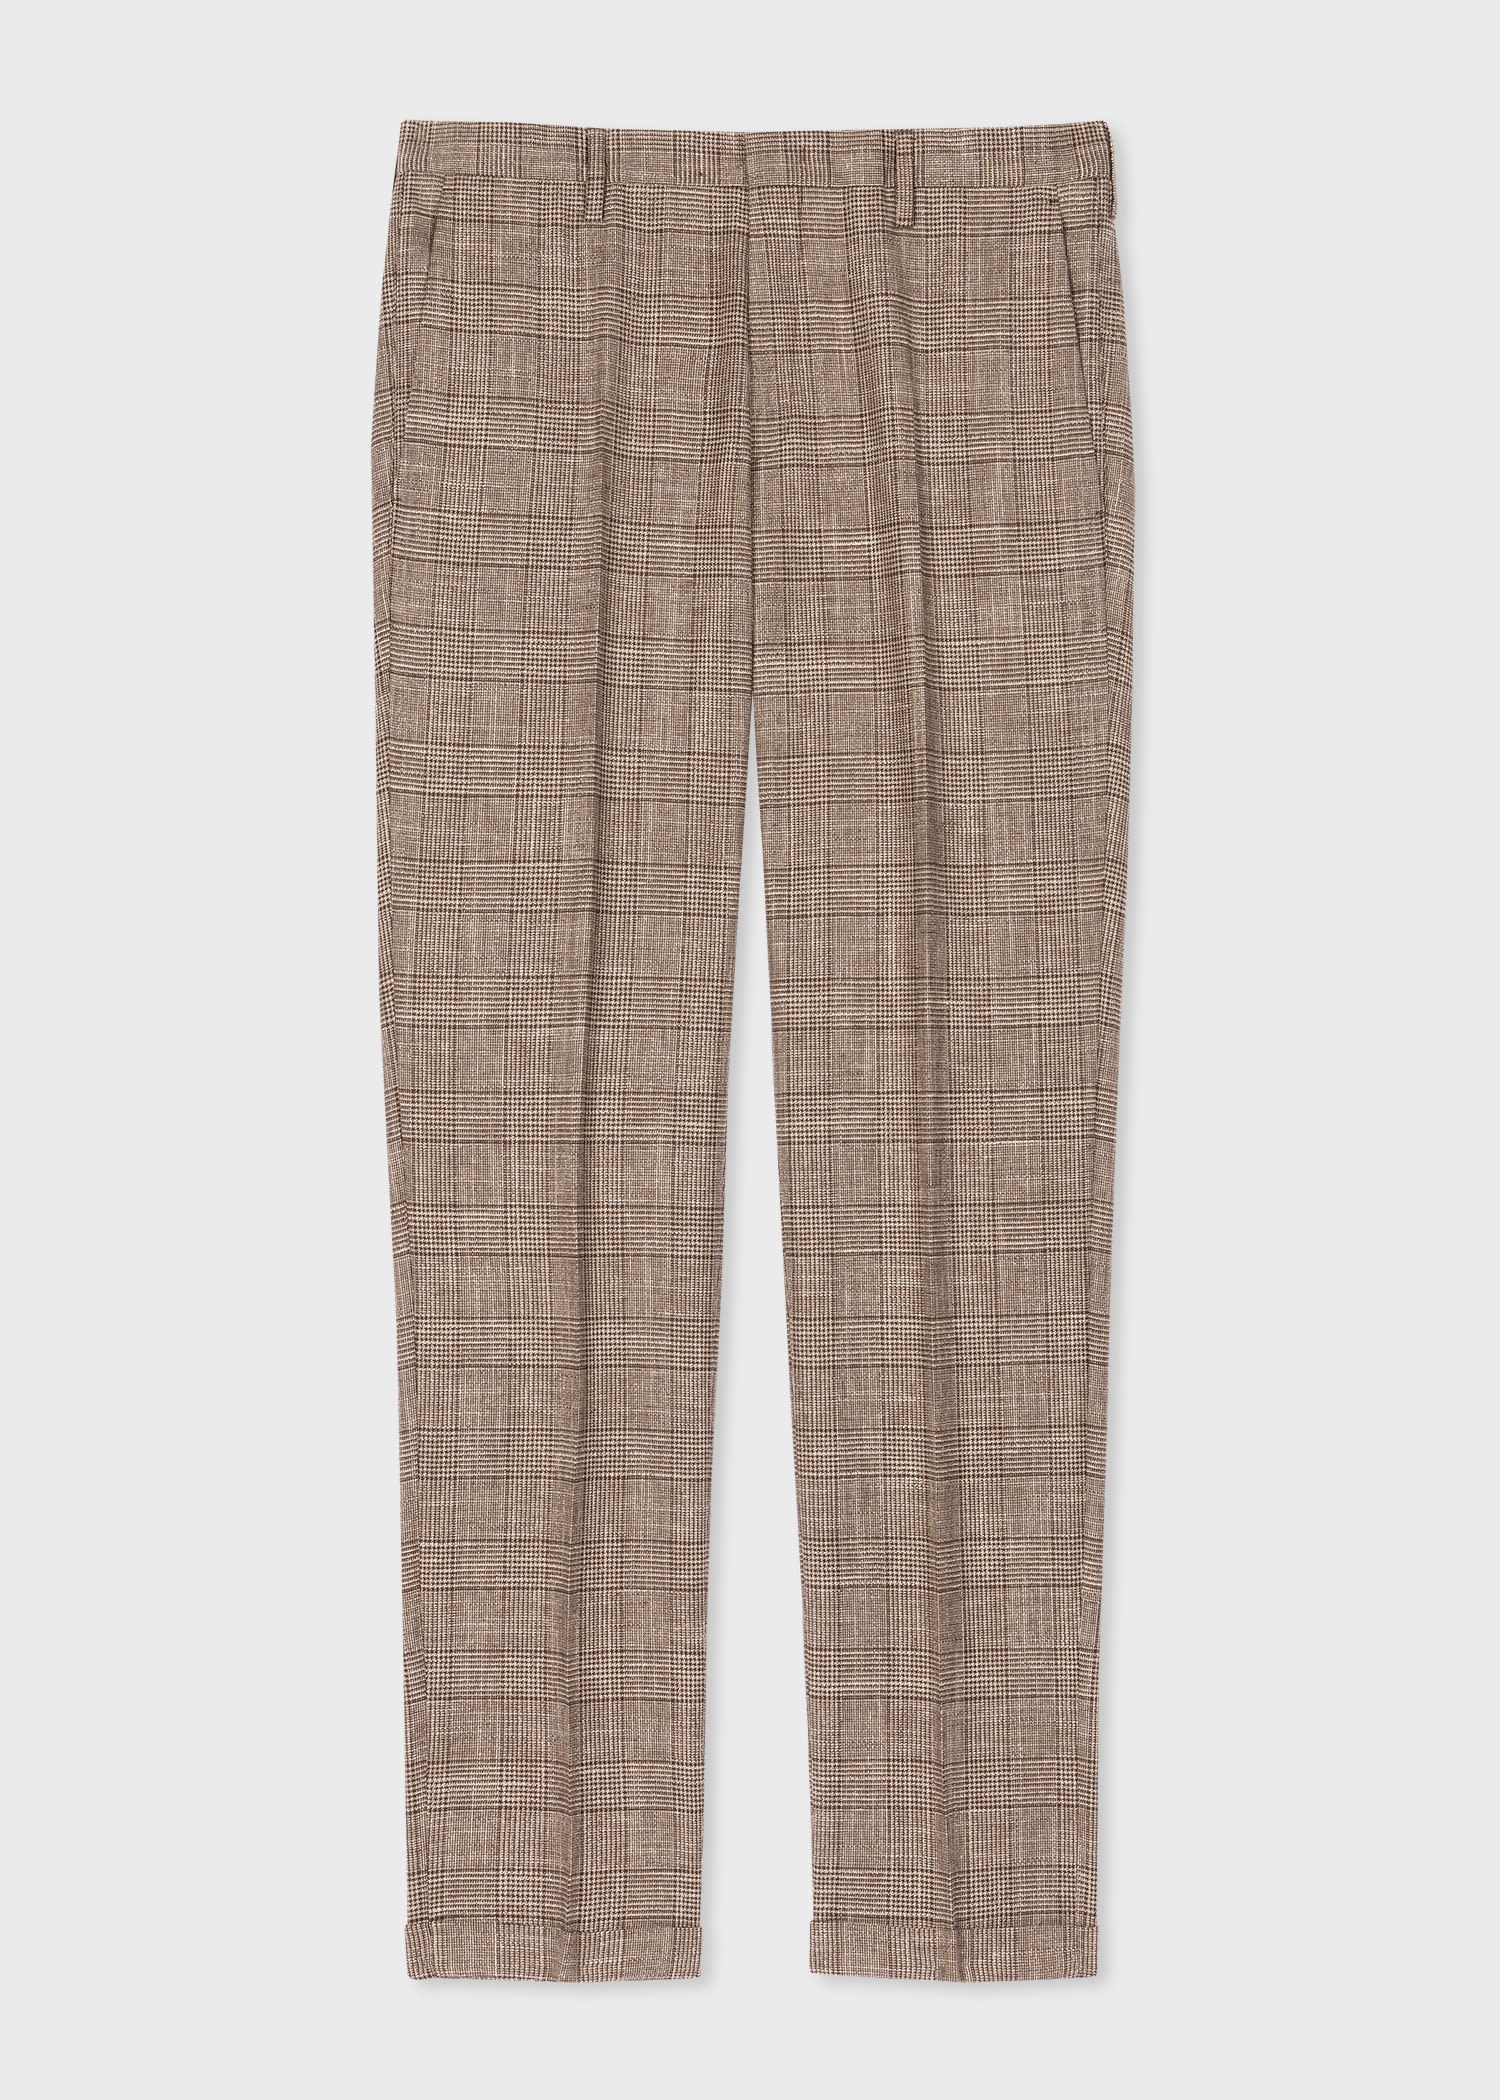 Houndstooth Check Wool-Linen Suit - 2